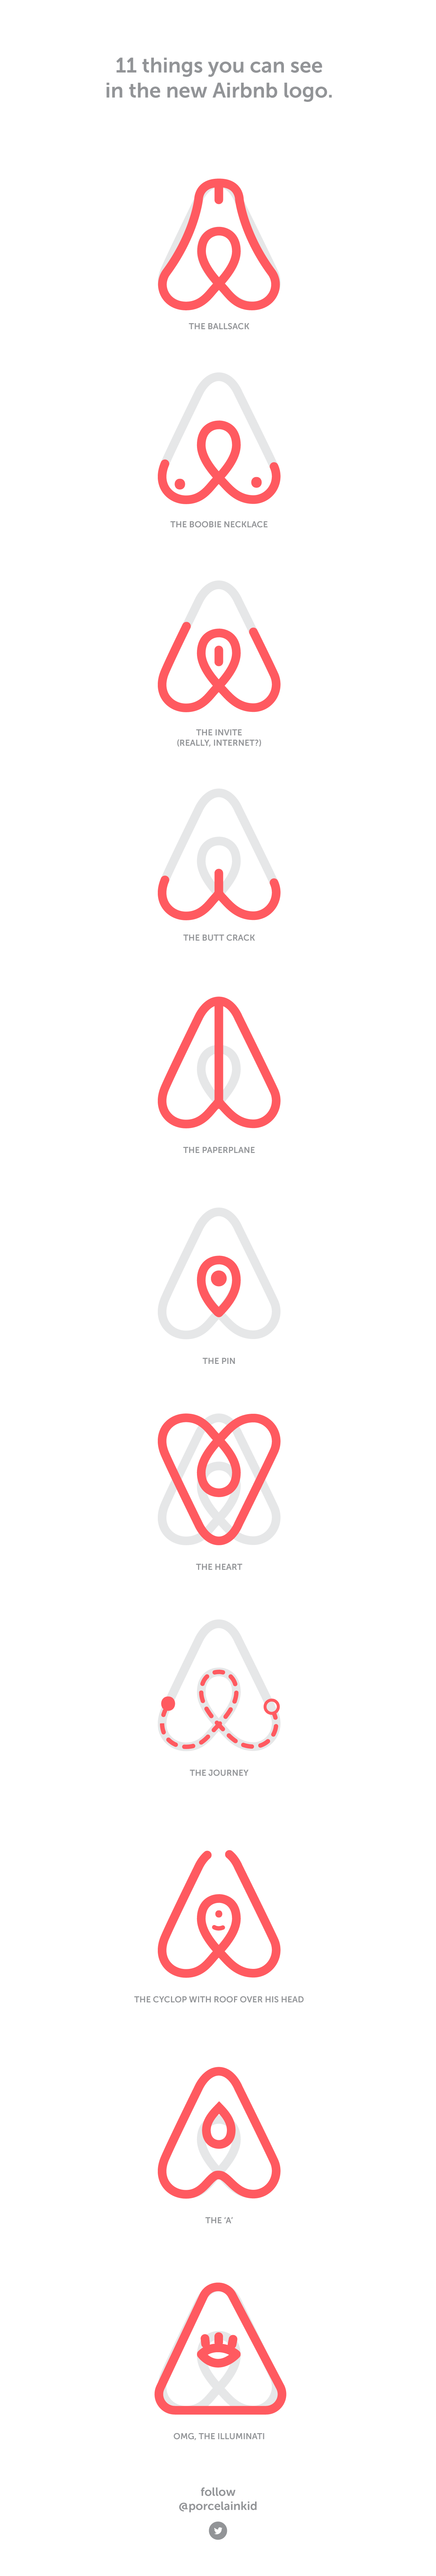 Airbnb Logo - Things You Can See in the New Airbnb Logo